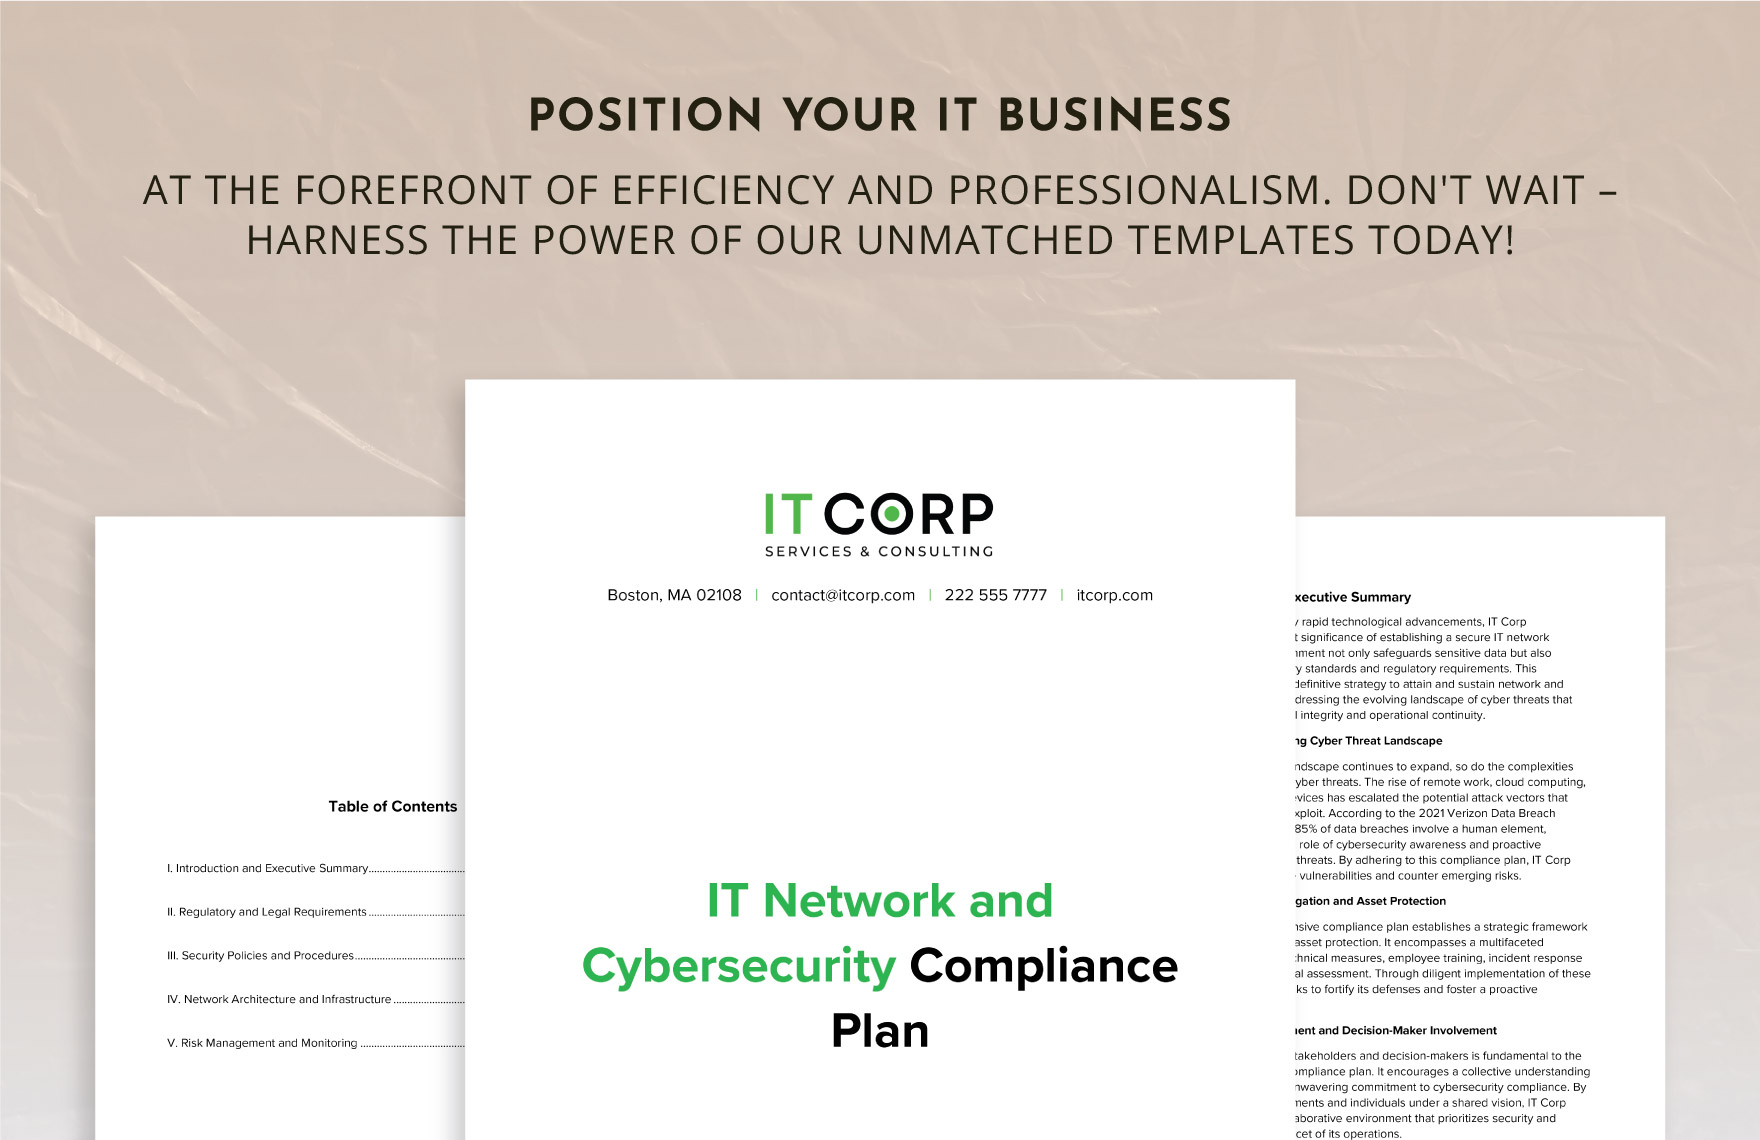 IT Network and Cybersecurity Compliance Plan Template